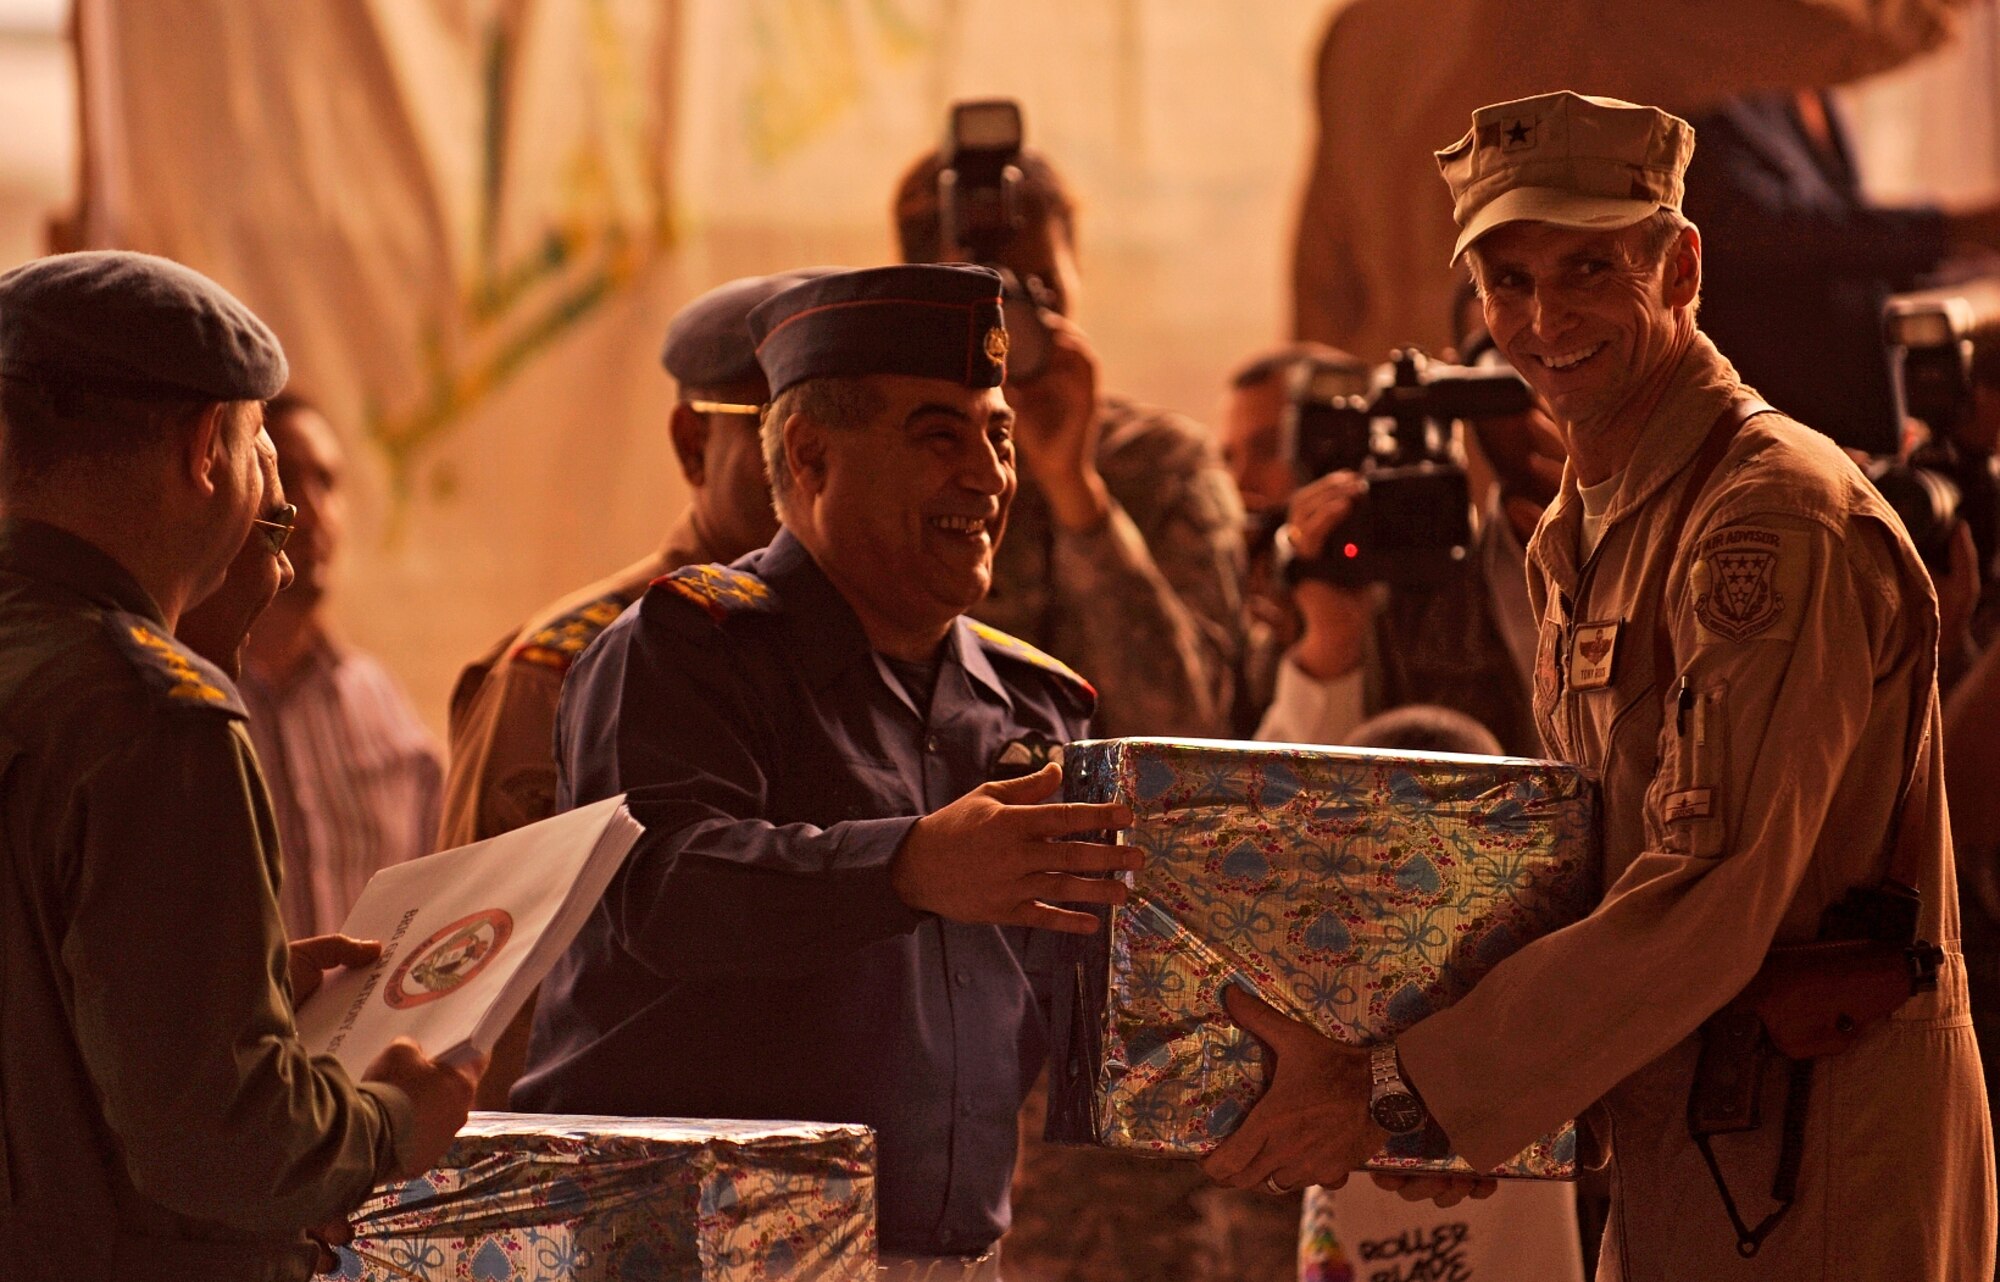 NEW AL-MUTHANA AIR BASE, Iraq -- Brig. Gen. Anthony Rock, Iraq Training and Advisory Mission - Air director, accepts a gift of appreciation from Iraqi air force leaders during the Iraqi air force's 80th anniversary celebration here April 21. More than 1,000 Airmen, Soldiers and contractors advise, train and assist their Iraqi partners at six major locations throughout Iraq in an effort to bolster the nation's capacity to provide internal security and defend against external threats. (U.S. Air Force/Tech. Sgt. Jason Lake)